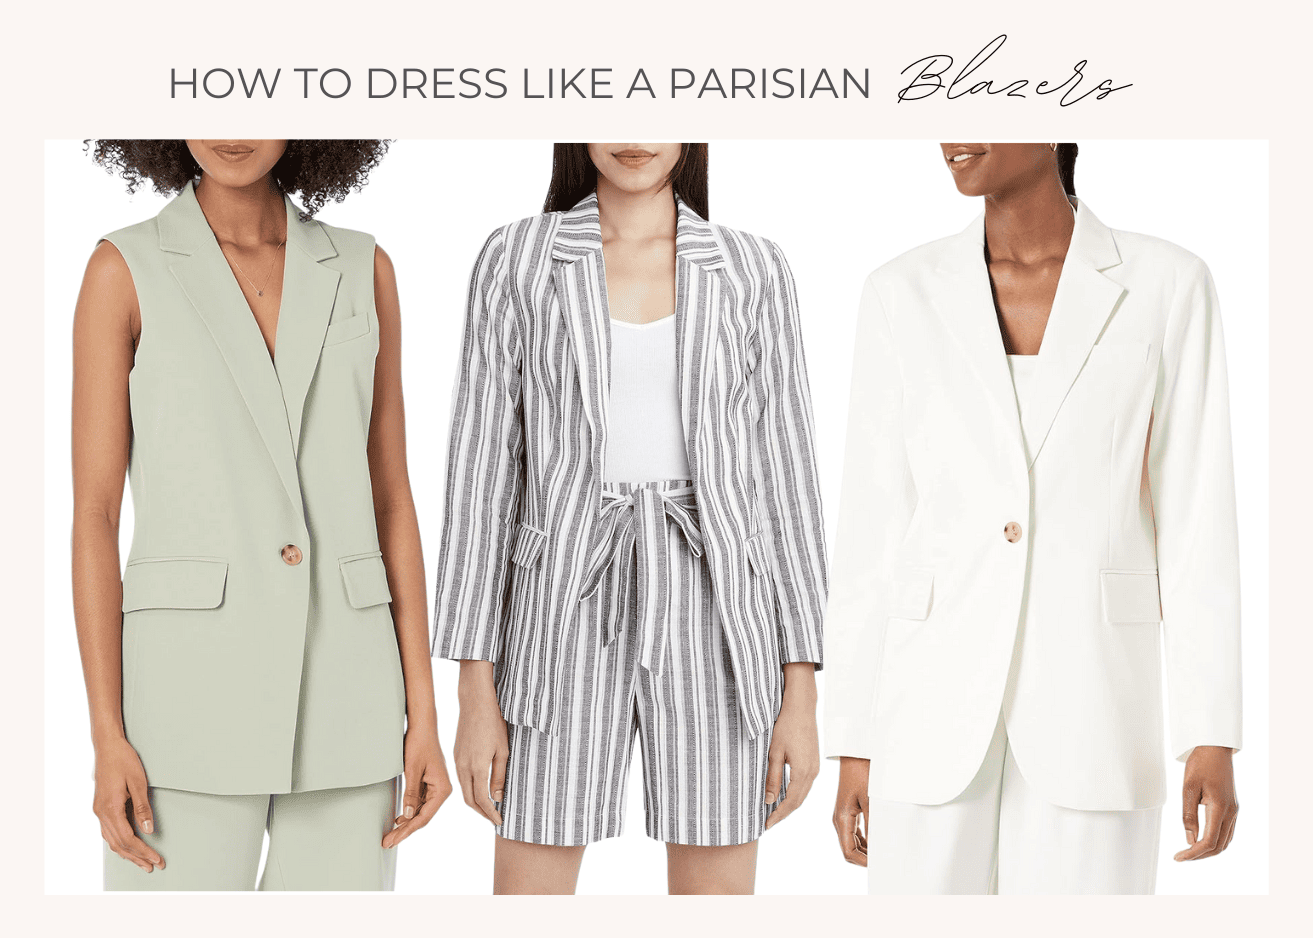 Collage image featuring blazers titled "How to dress like a parisian shirt blazers"